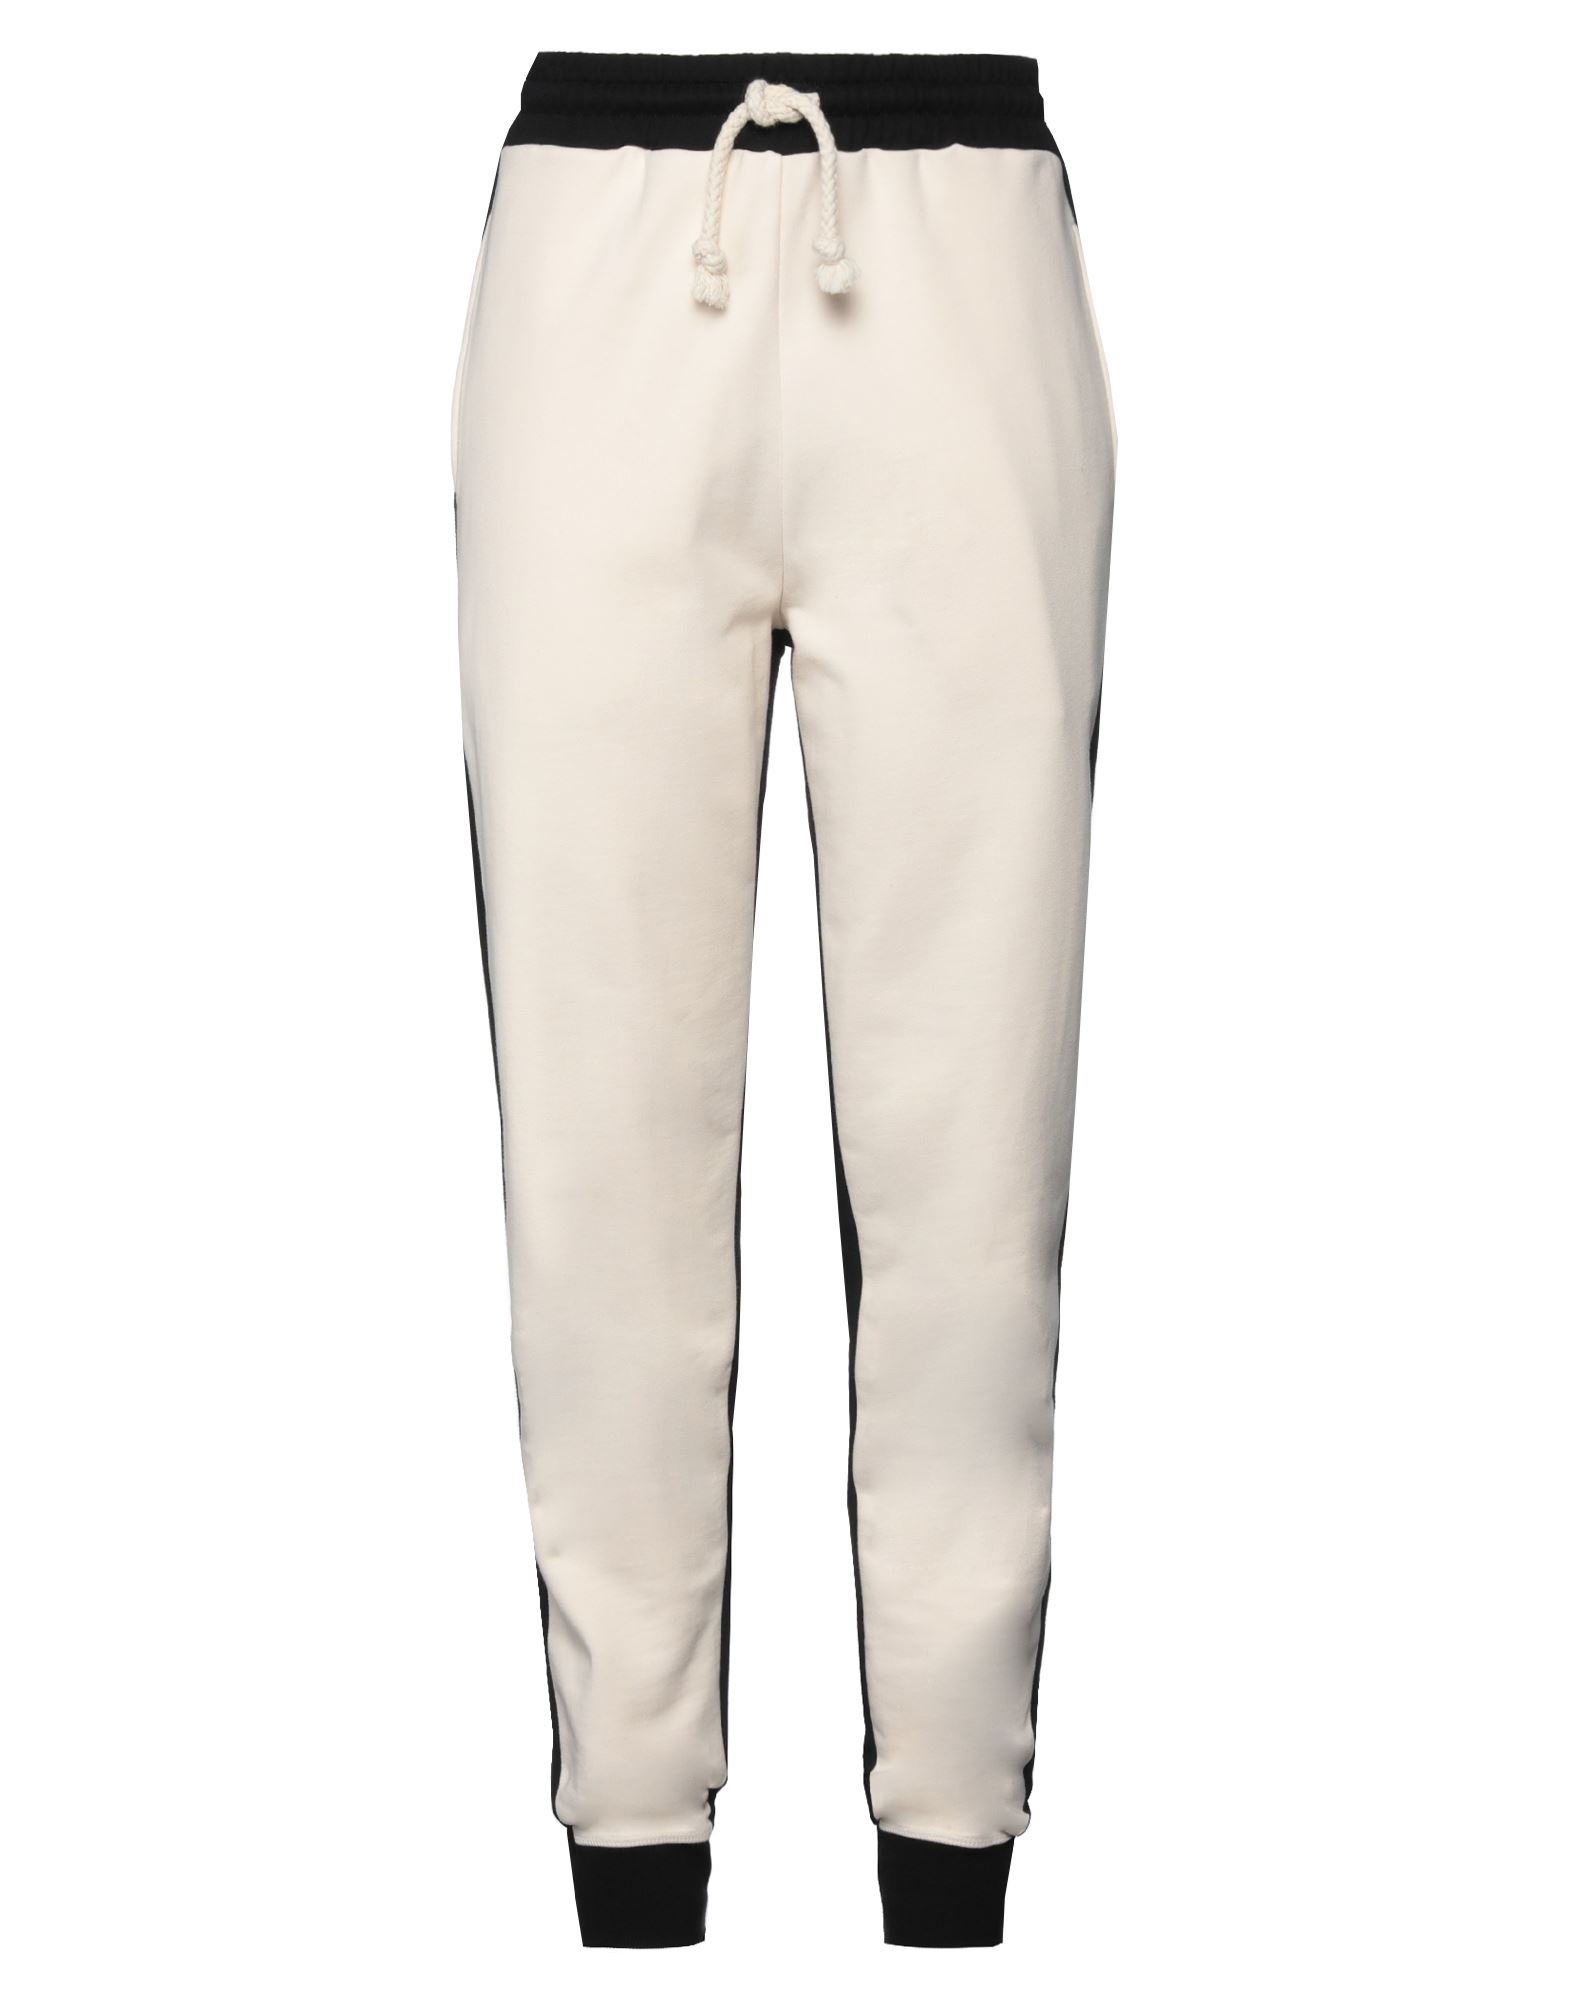 JW ANDERSON JW ANDERSON WOMAN PANTS IVORY SIZE S COTTON